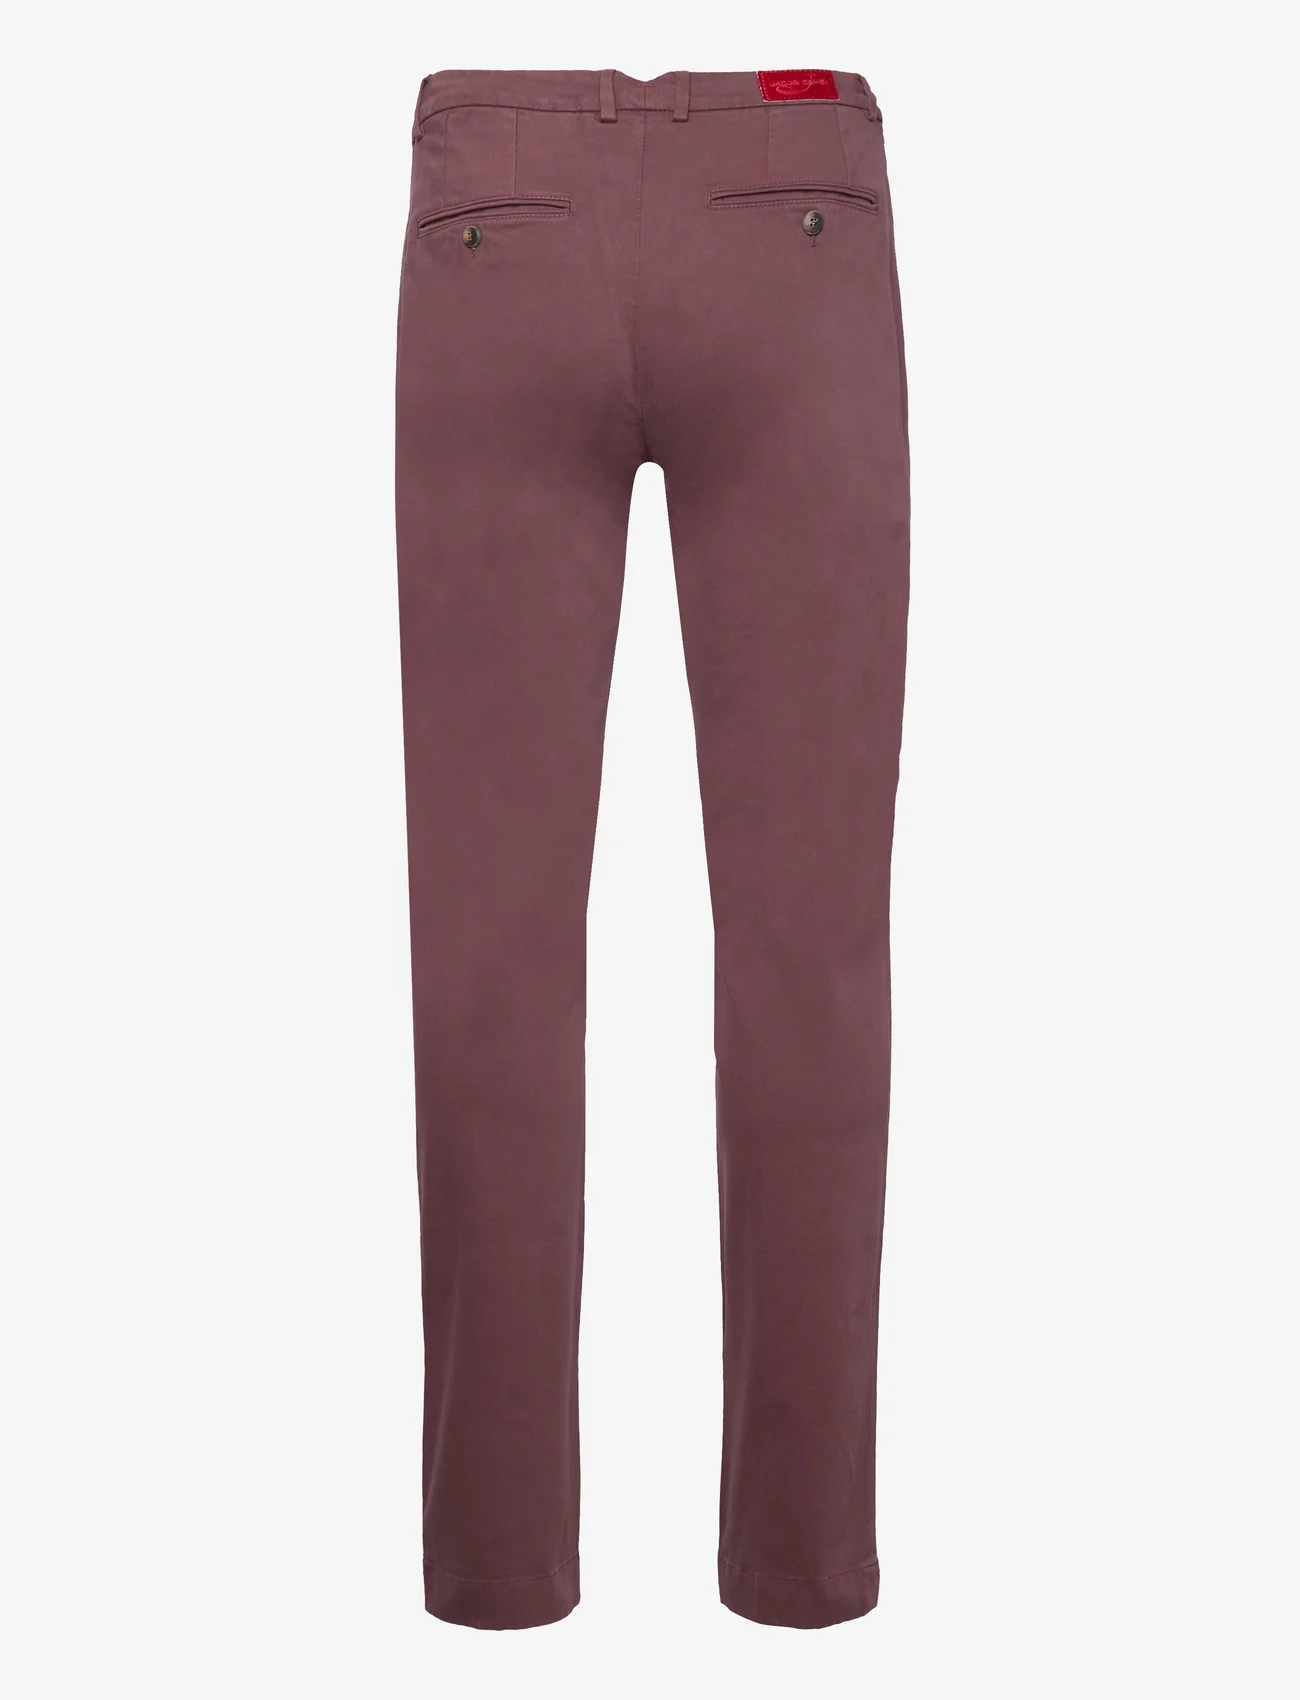 Jacob Cohen - SEMI CLASSIC COMFORT PPT STR SOLID - chino's - burgundy - 1